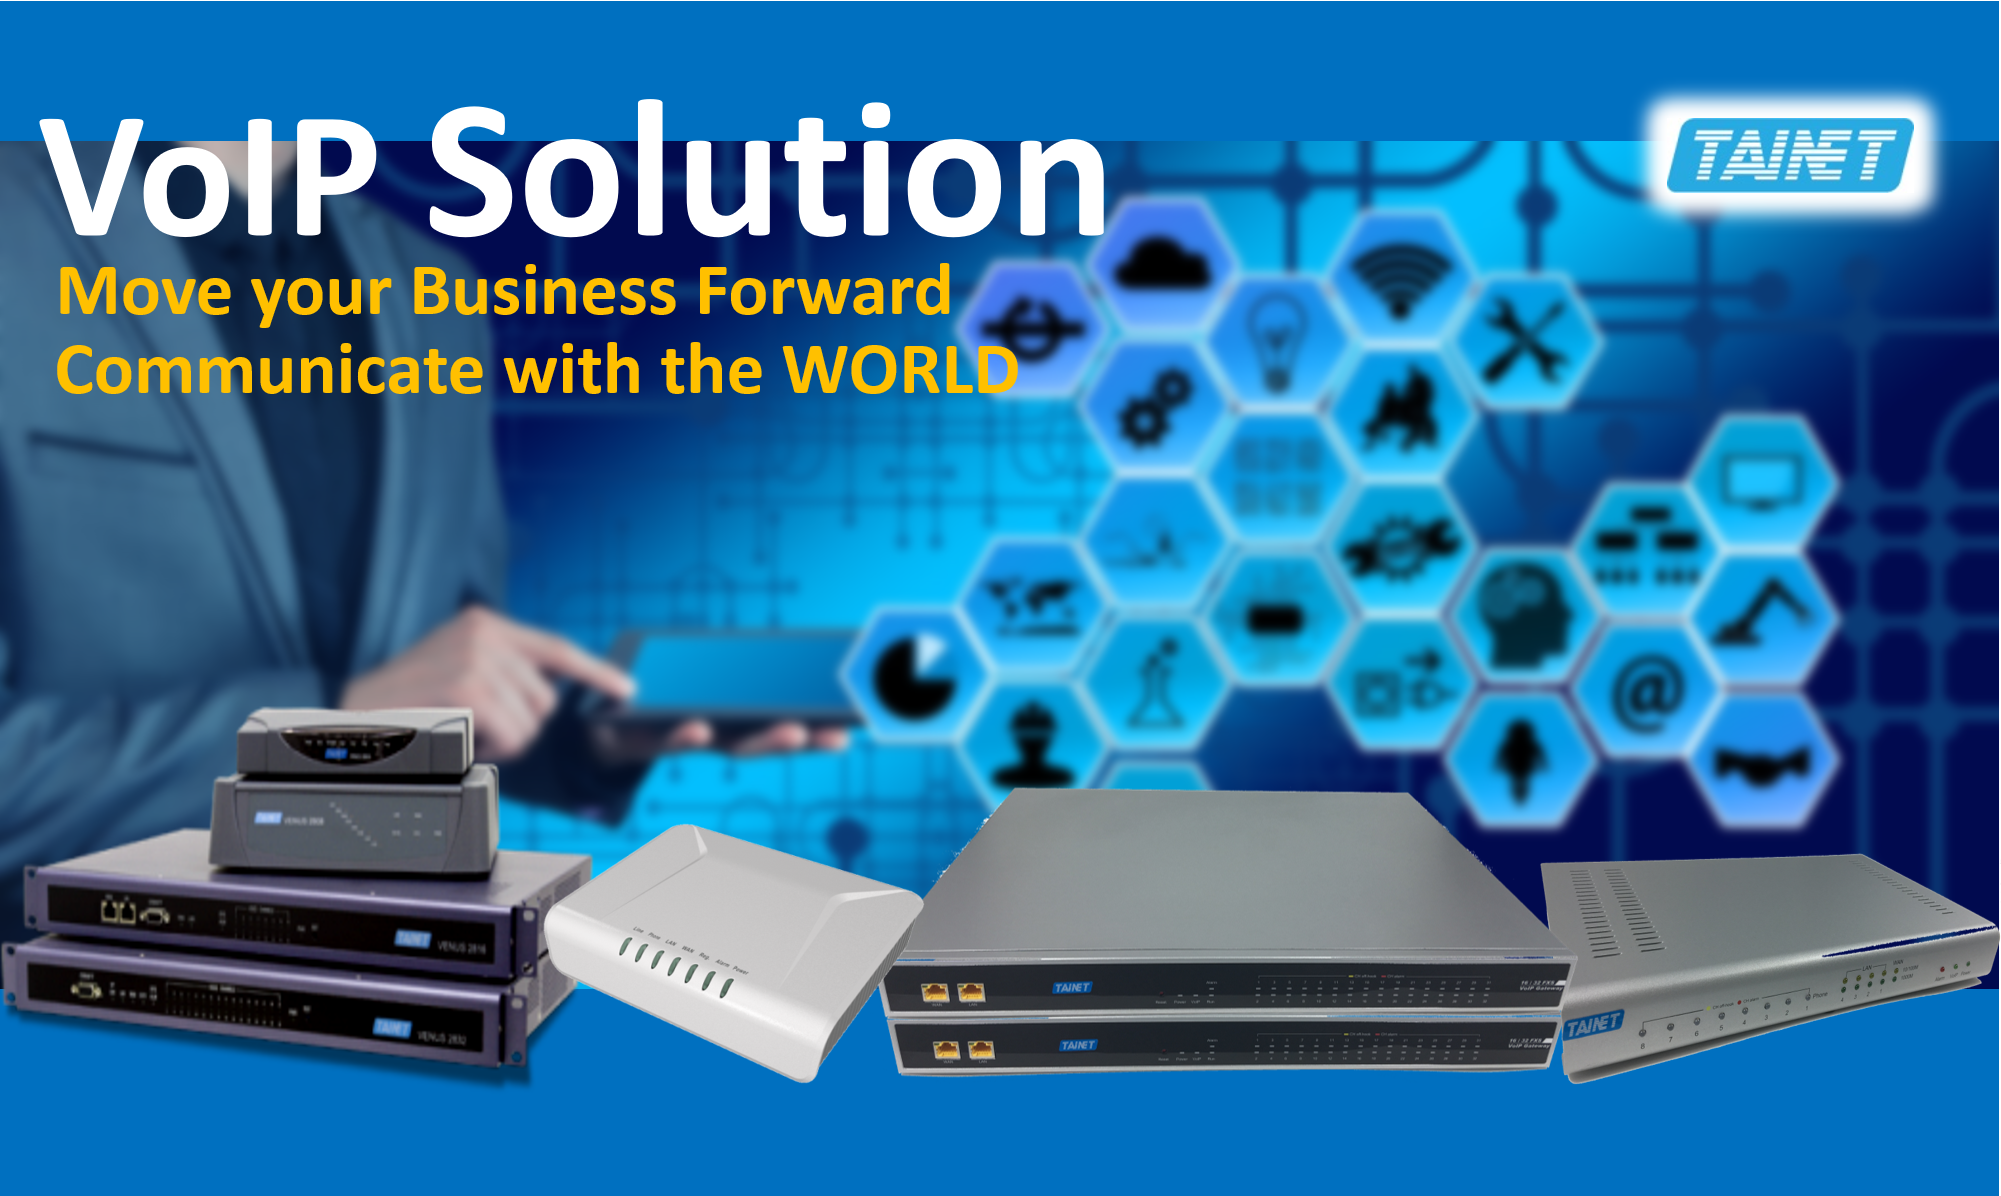 VoIP Solution